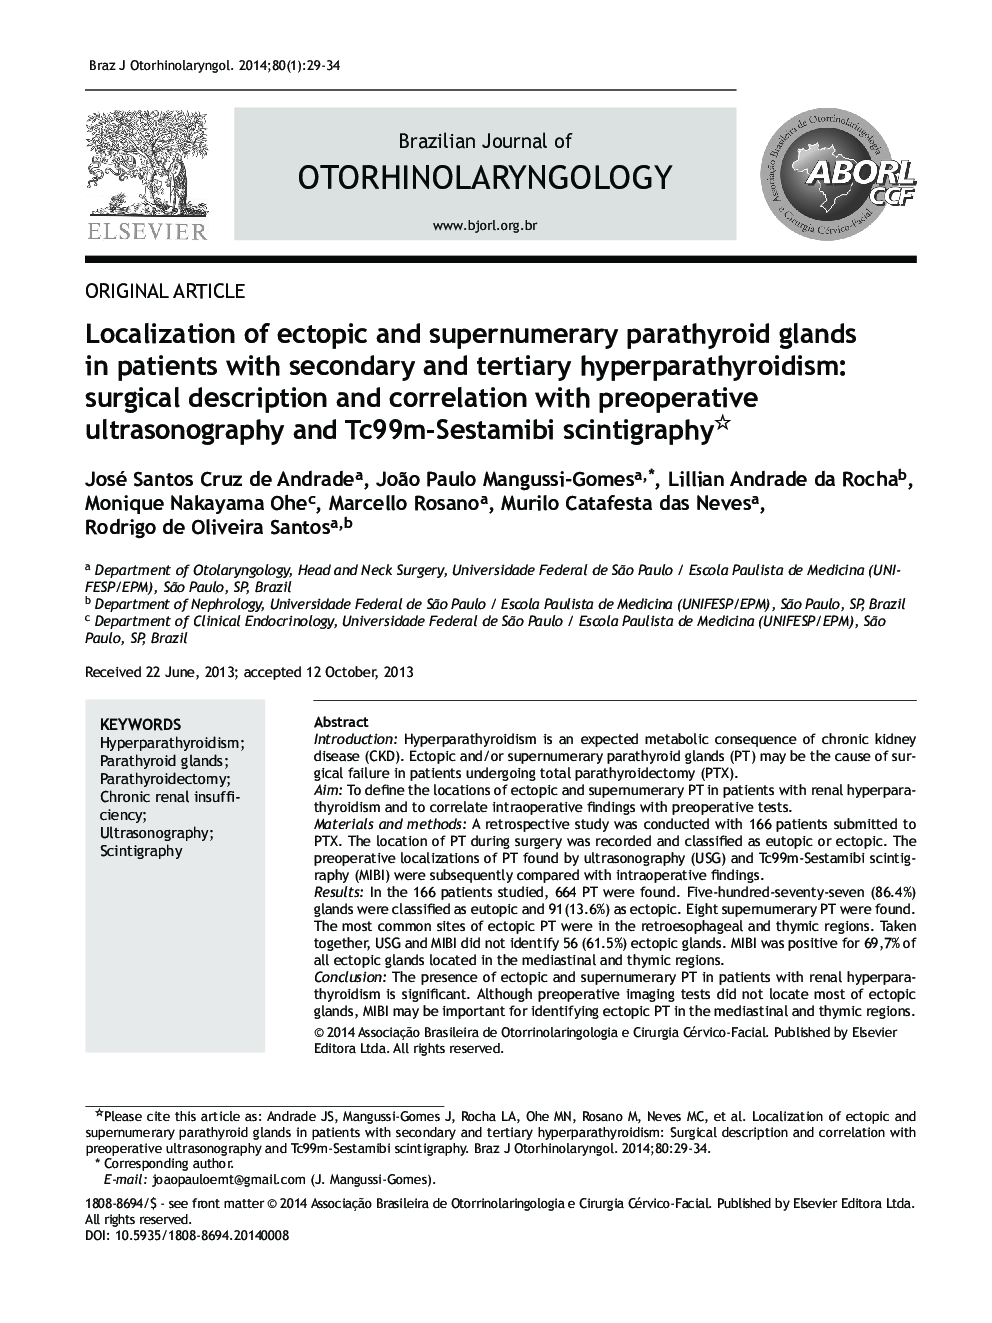 Localization of ectopic and supernumerary parathyroid glands in patients with secondary and tertiary hyperparathyroidism: surgical description and correlation with preoperative ultrasonography and Tc99m-Sestamibi scintigraphy✩